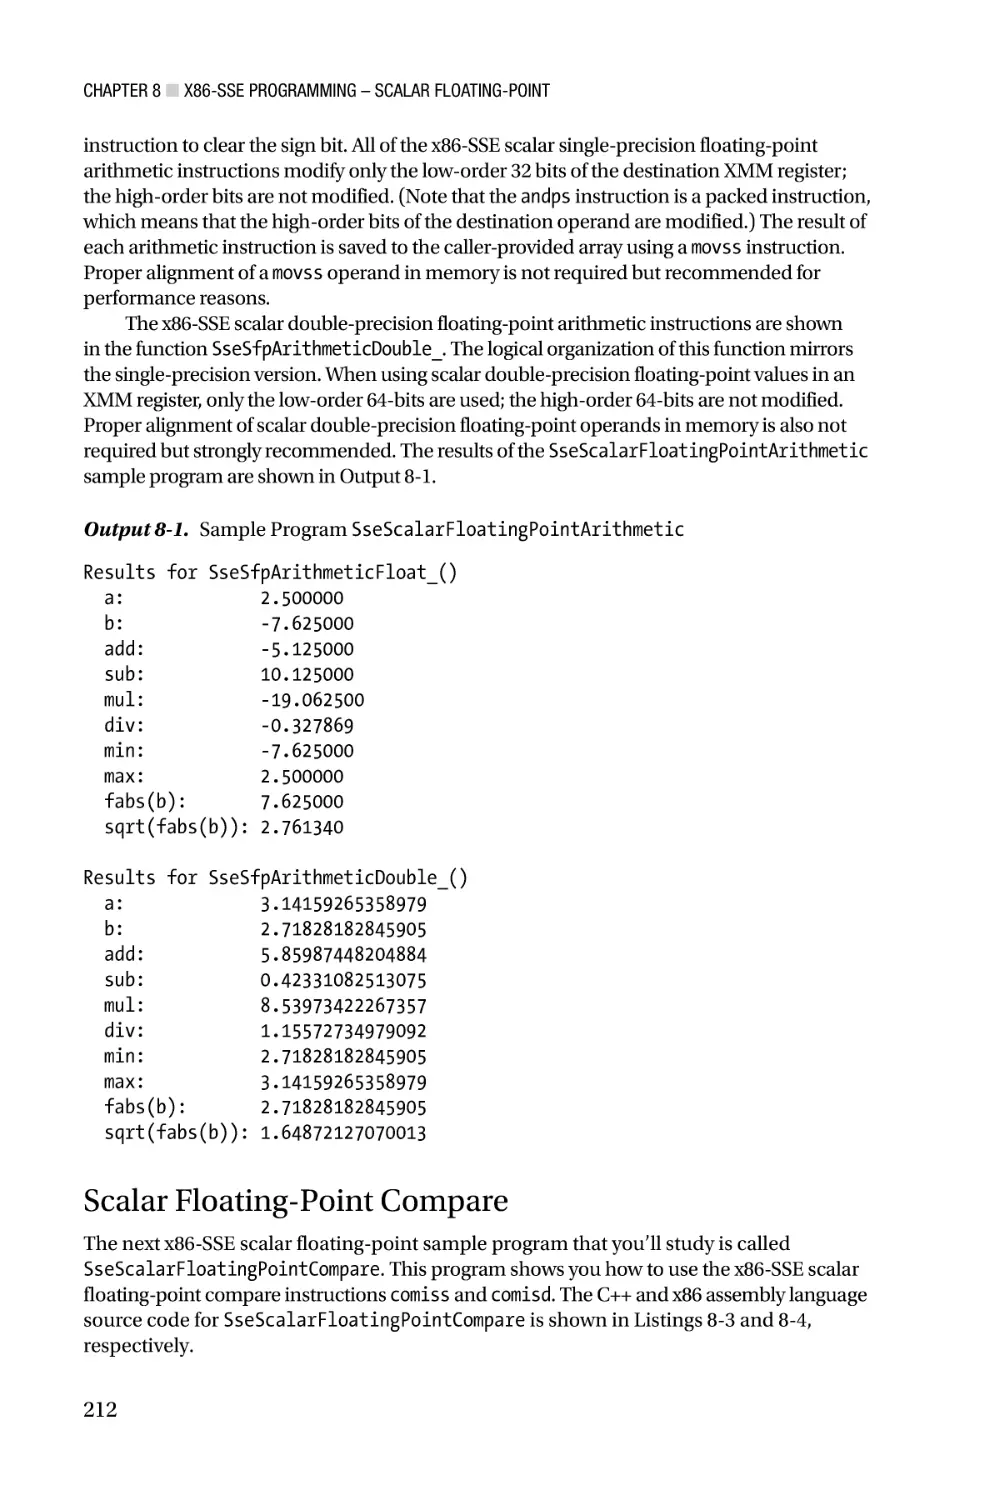 Scalar Floating-Point Compare